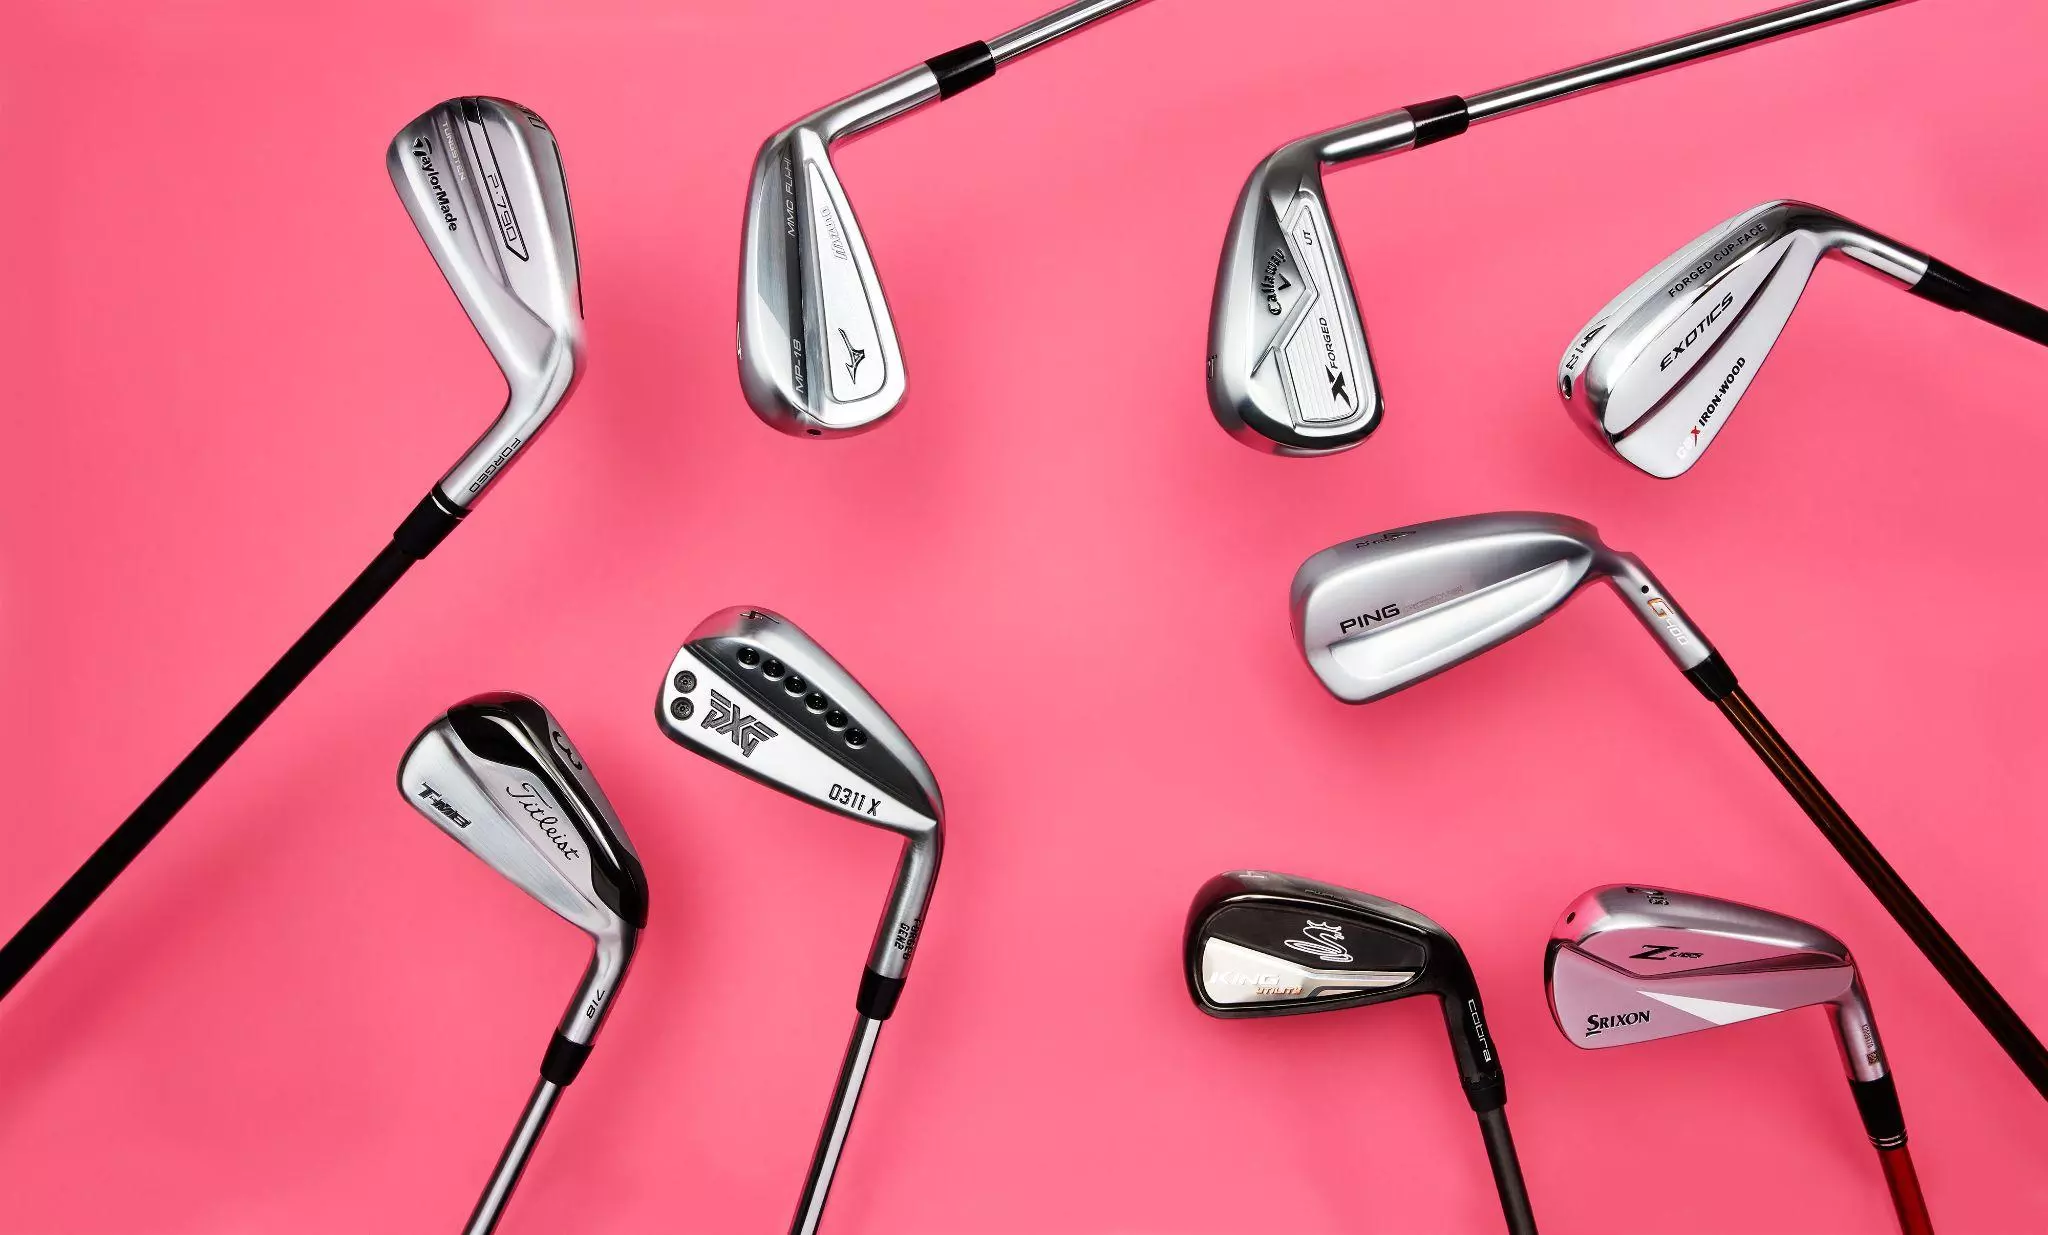 We've tested dozens and dozens of golf driving and utility irons and have hand selected our top 5 picks that we think you should consider adding to your golf bag